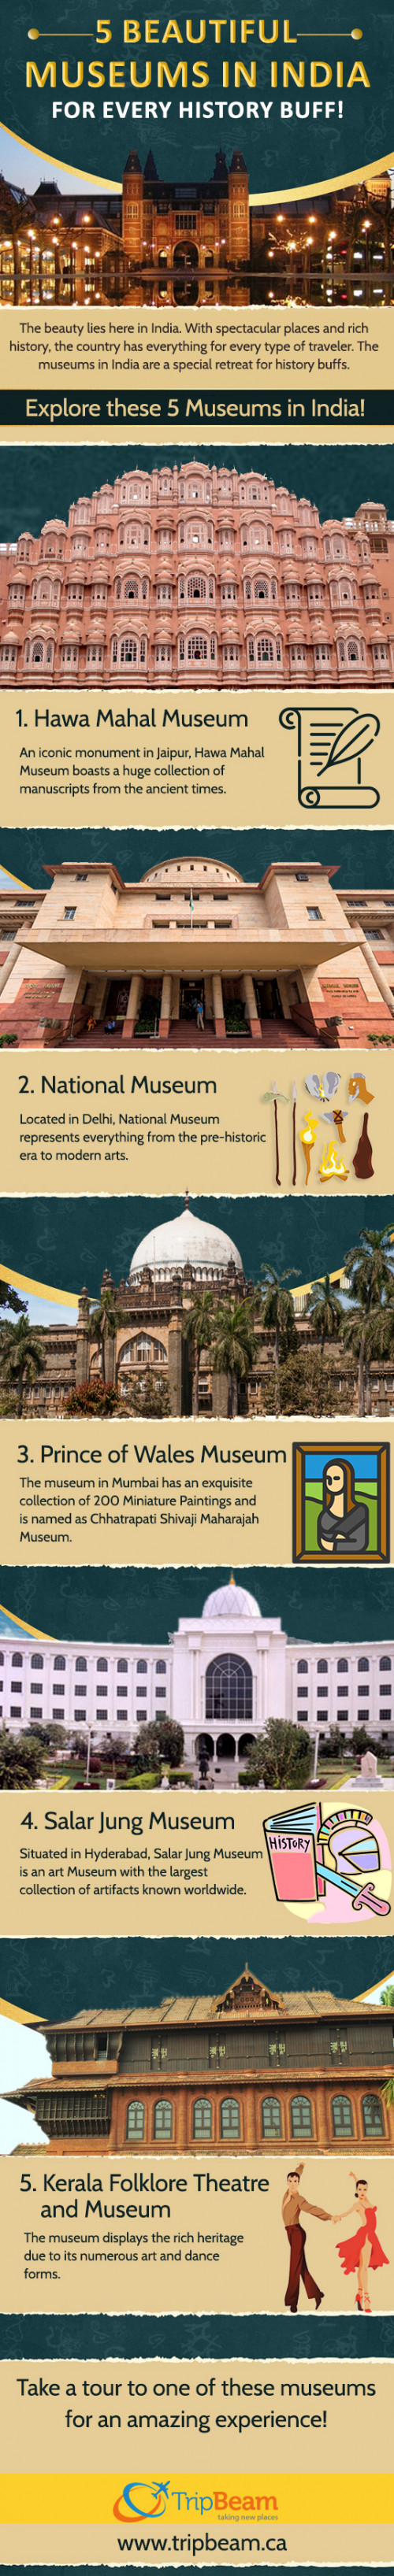 5 Beautiful Museums in India for Every History Buff